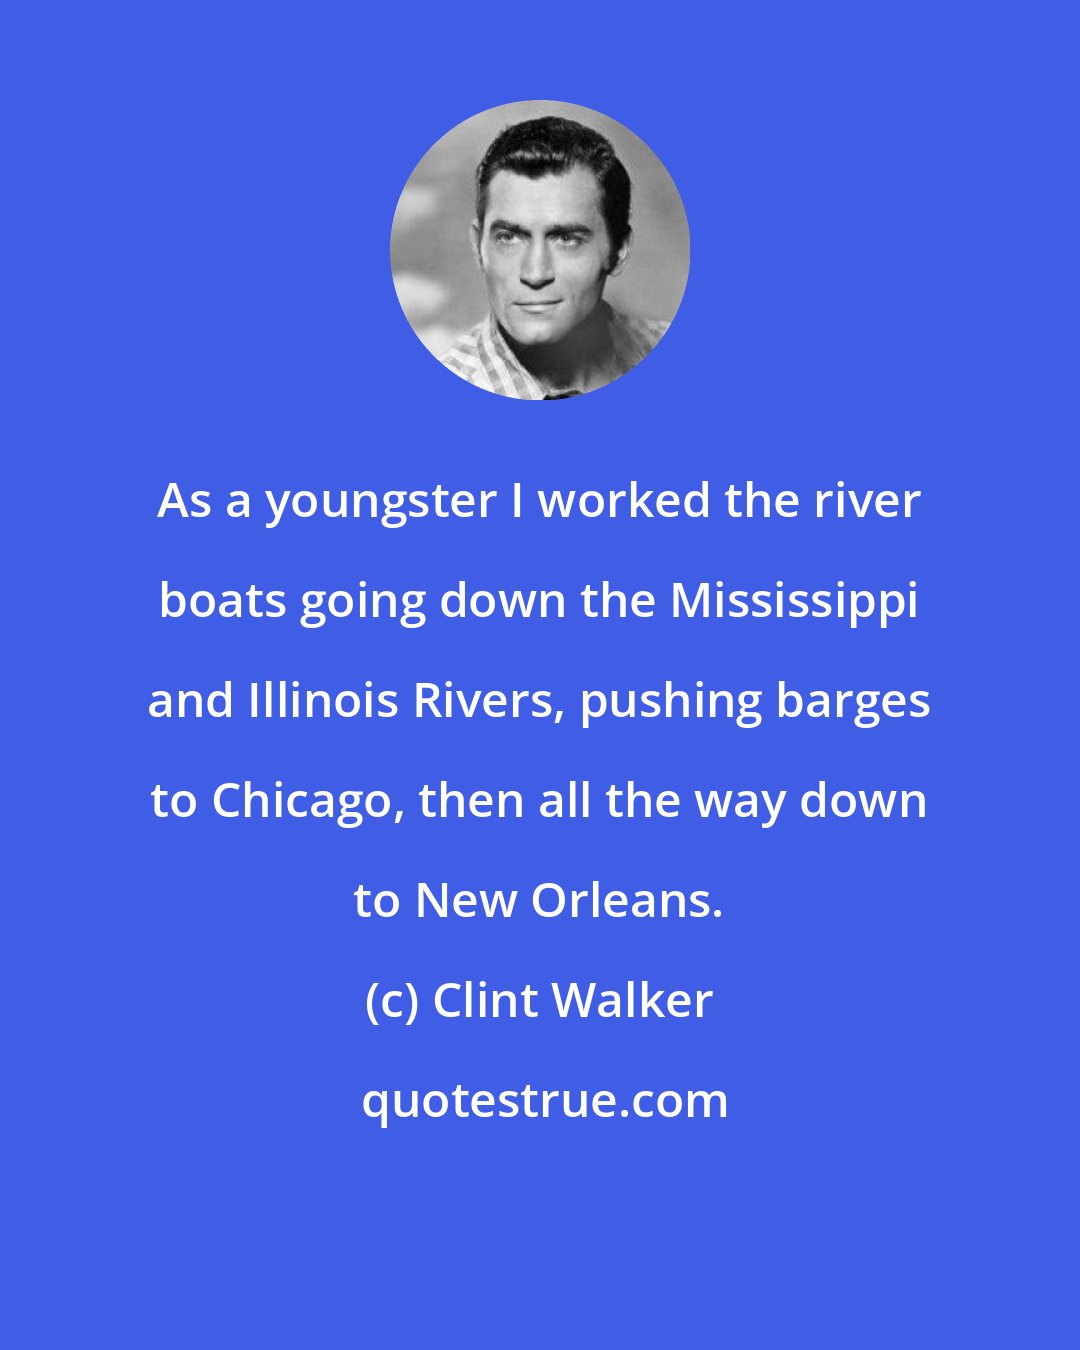 Clint Walker: As a youngster I worked the river boats going down the Mississippi and Illinois Rivers, pushing barges to Chicago, then all the way down to New Orleans.